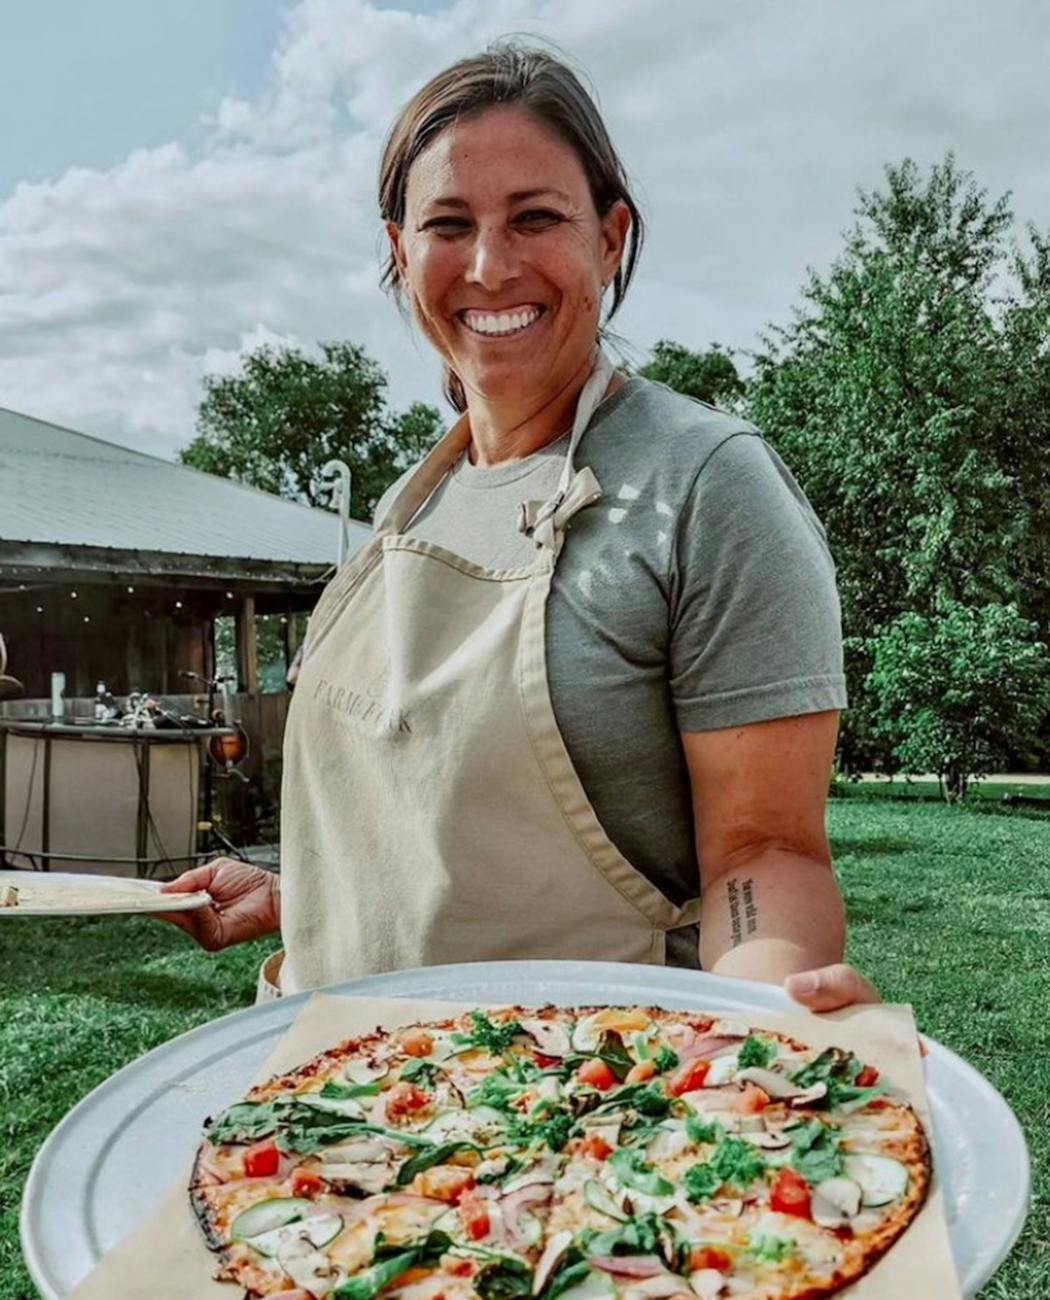 Farm to Fork in Mondovi, Wis., serves up pizza, cocktails and more on 18 idyllic acres. Provided